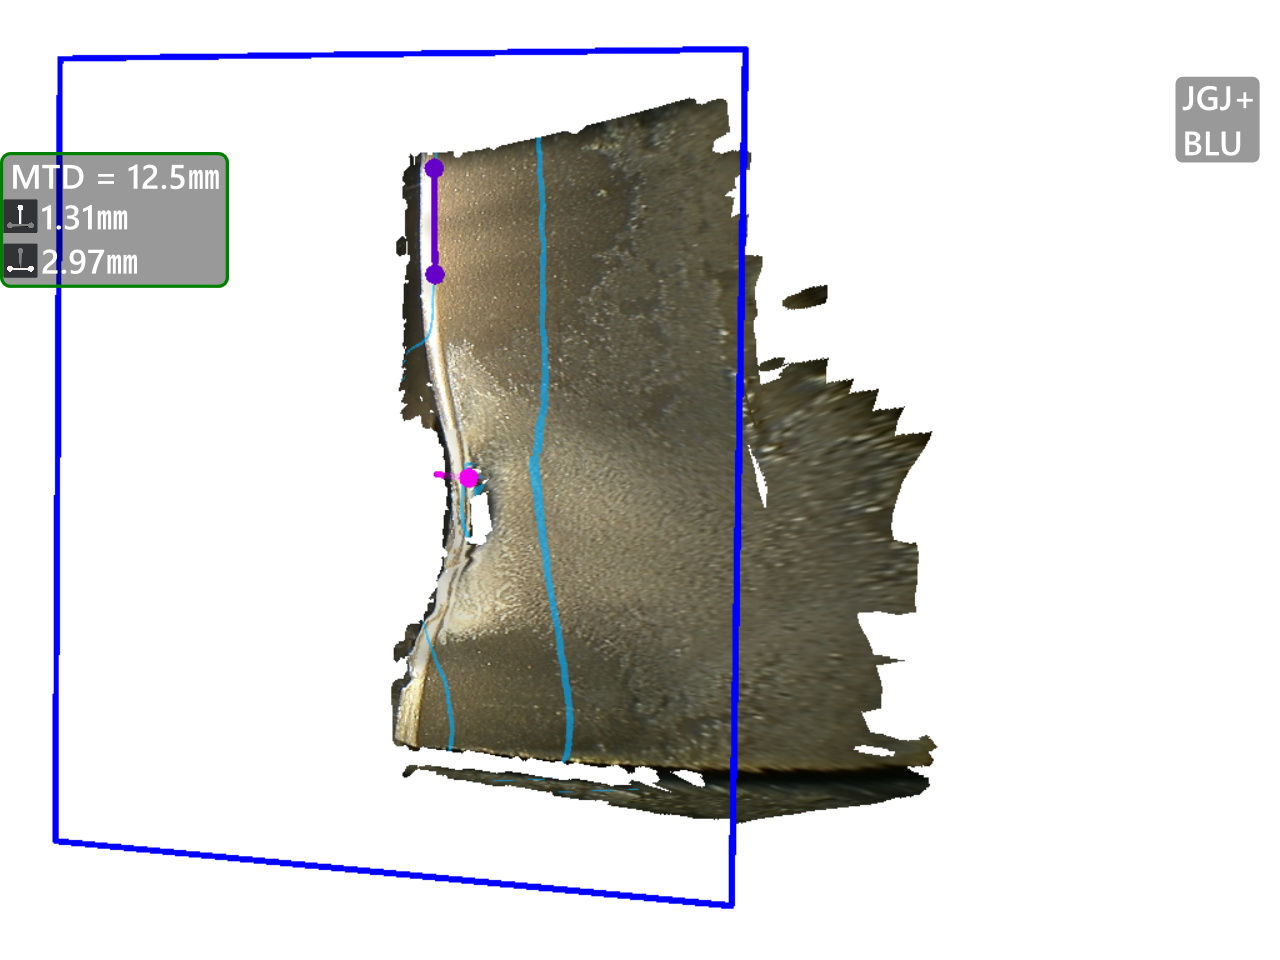 Image showing Real3D Stereo Measurement point cloud generating a model of the area of the defect.